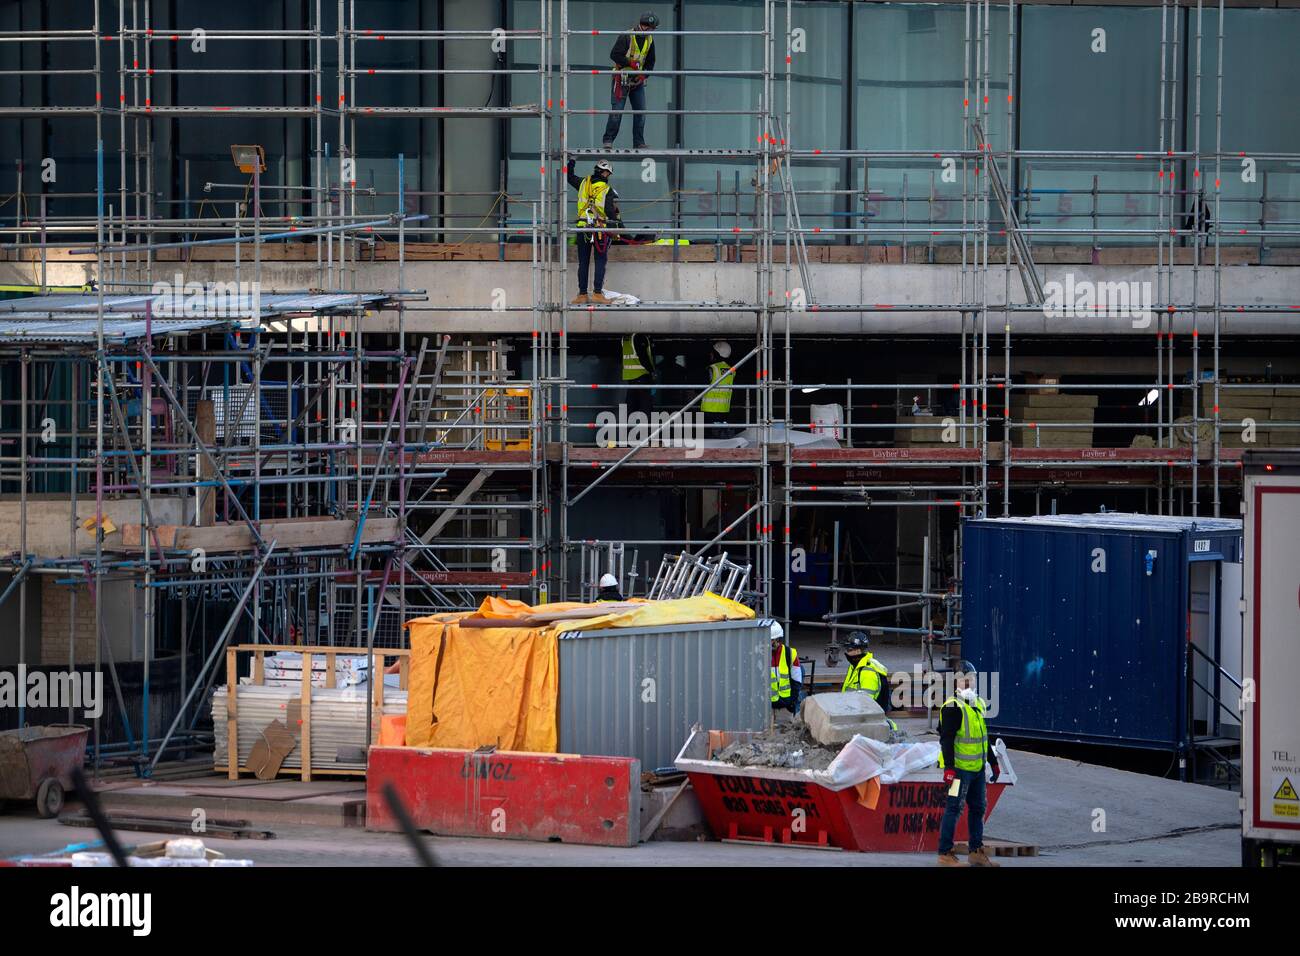 Construction workers on a residential building in Canary Wharf, after Prime Minister Boris Johnson has put the UK in lockdown to help curb the spread of the coronavirus. Stock Photo